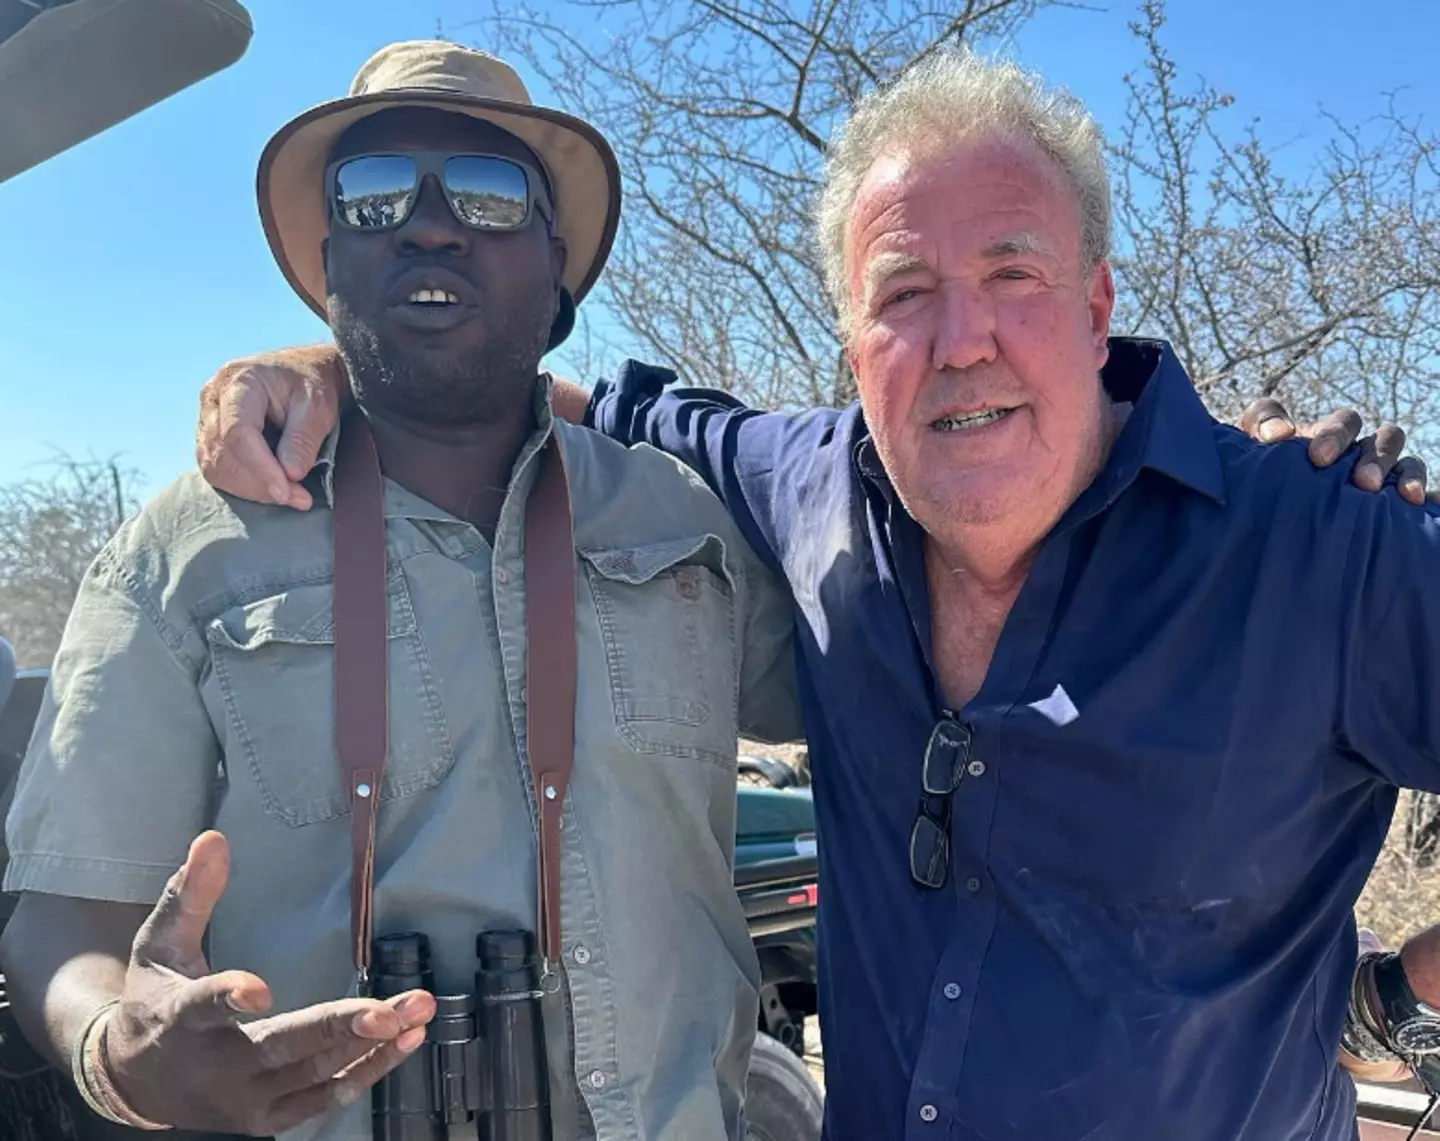 Jeremy Clarkson thanked his friend Super for 'saving the day'.